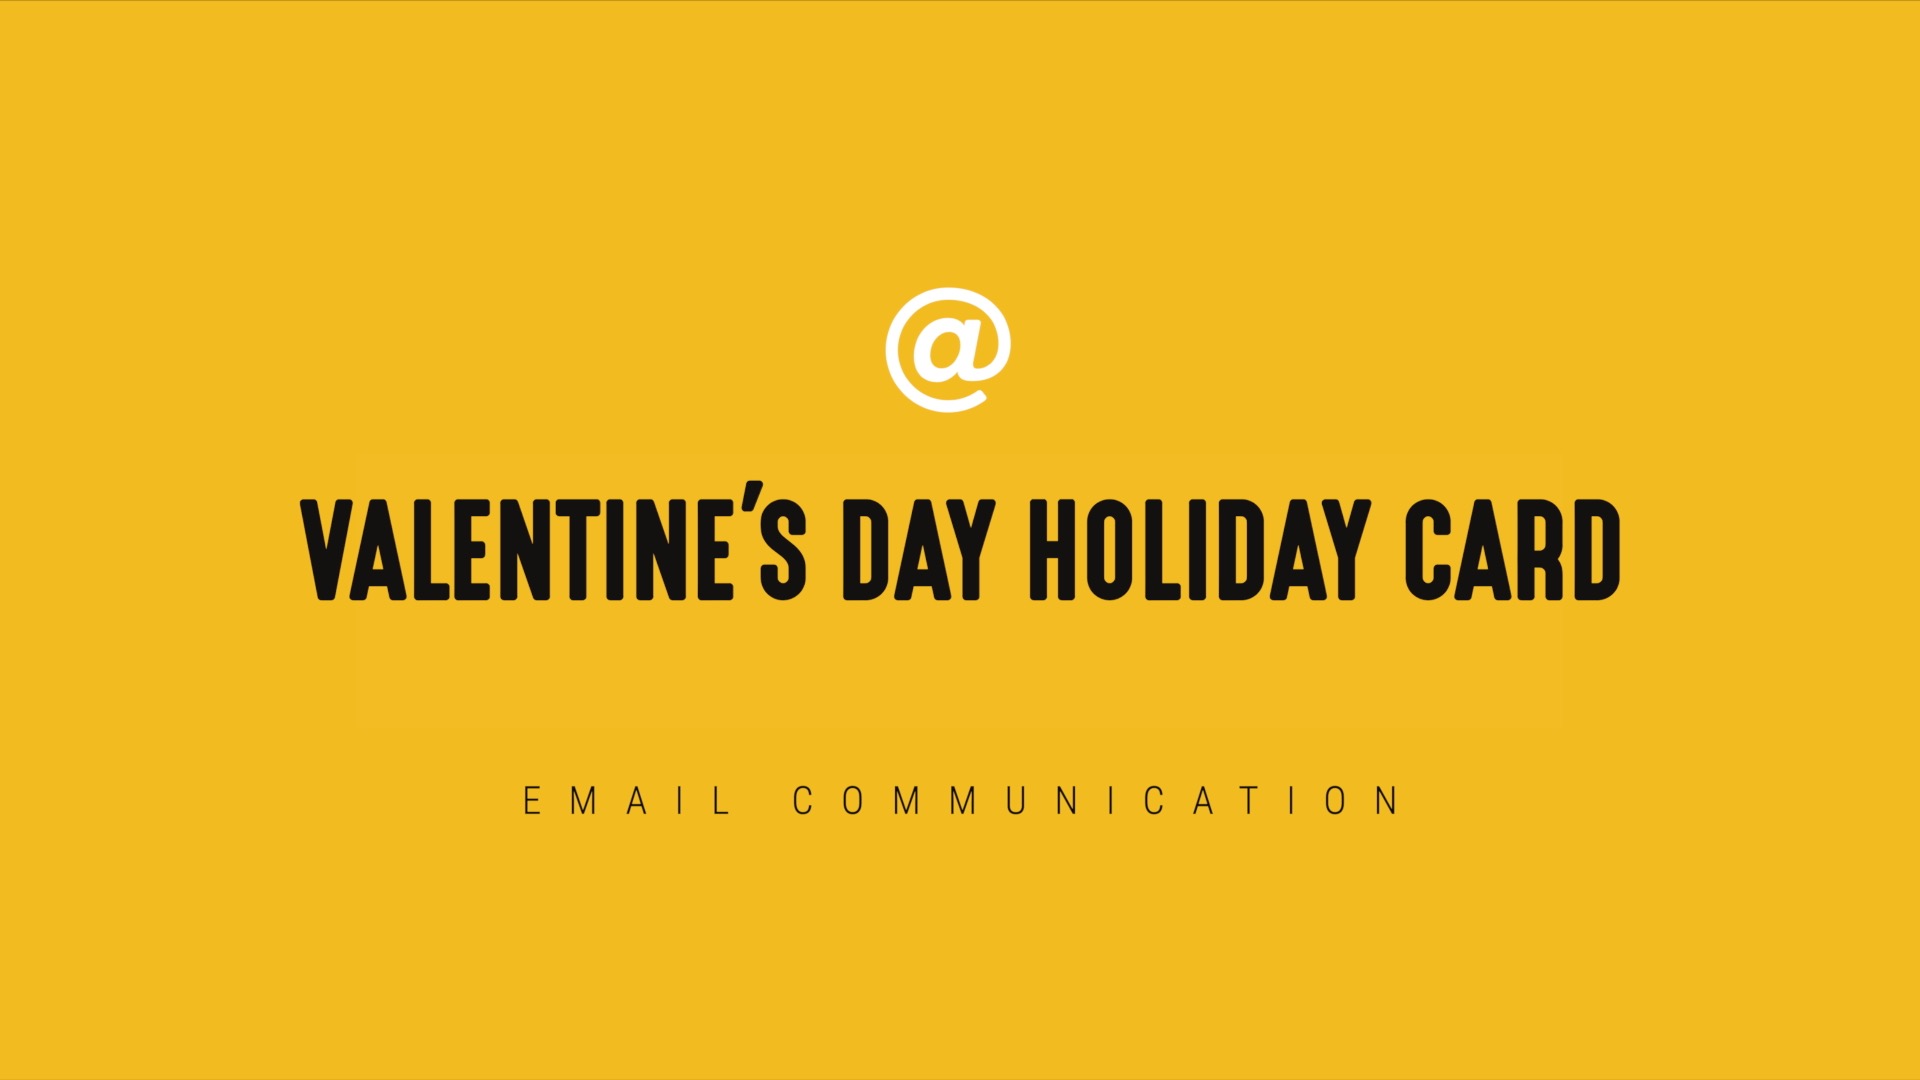 [NEW] Email Communication - Valentine’s Day Holiday Card